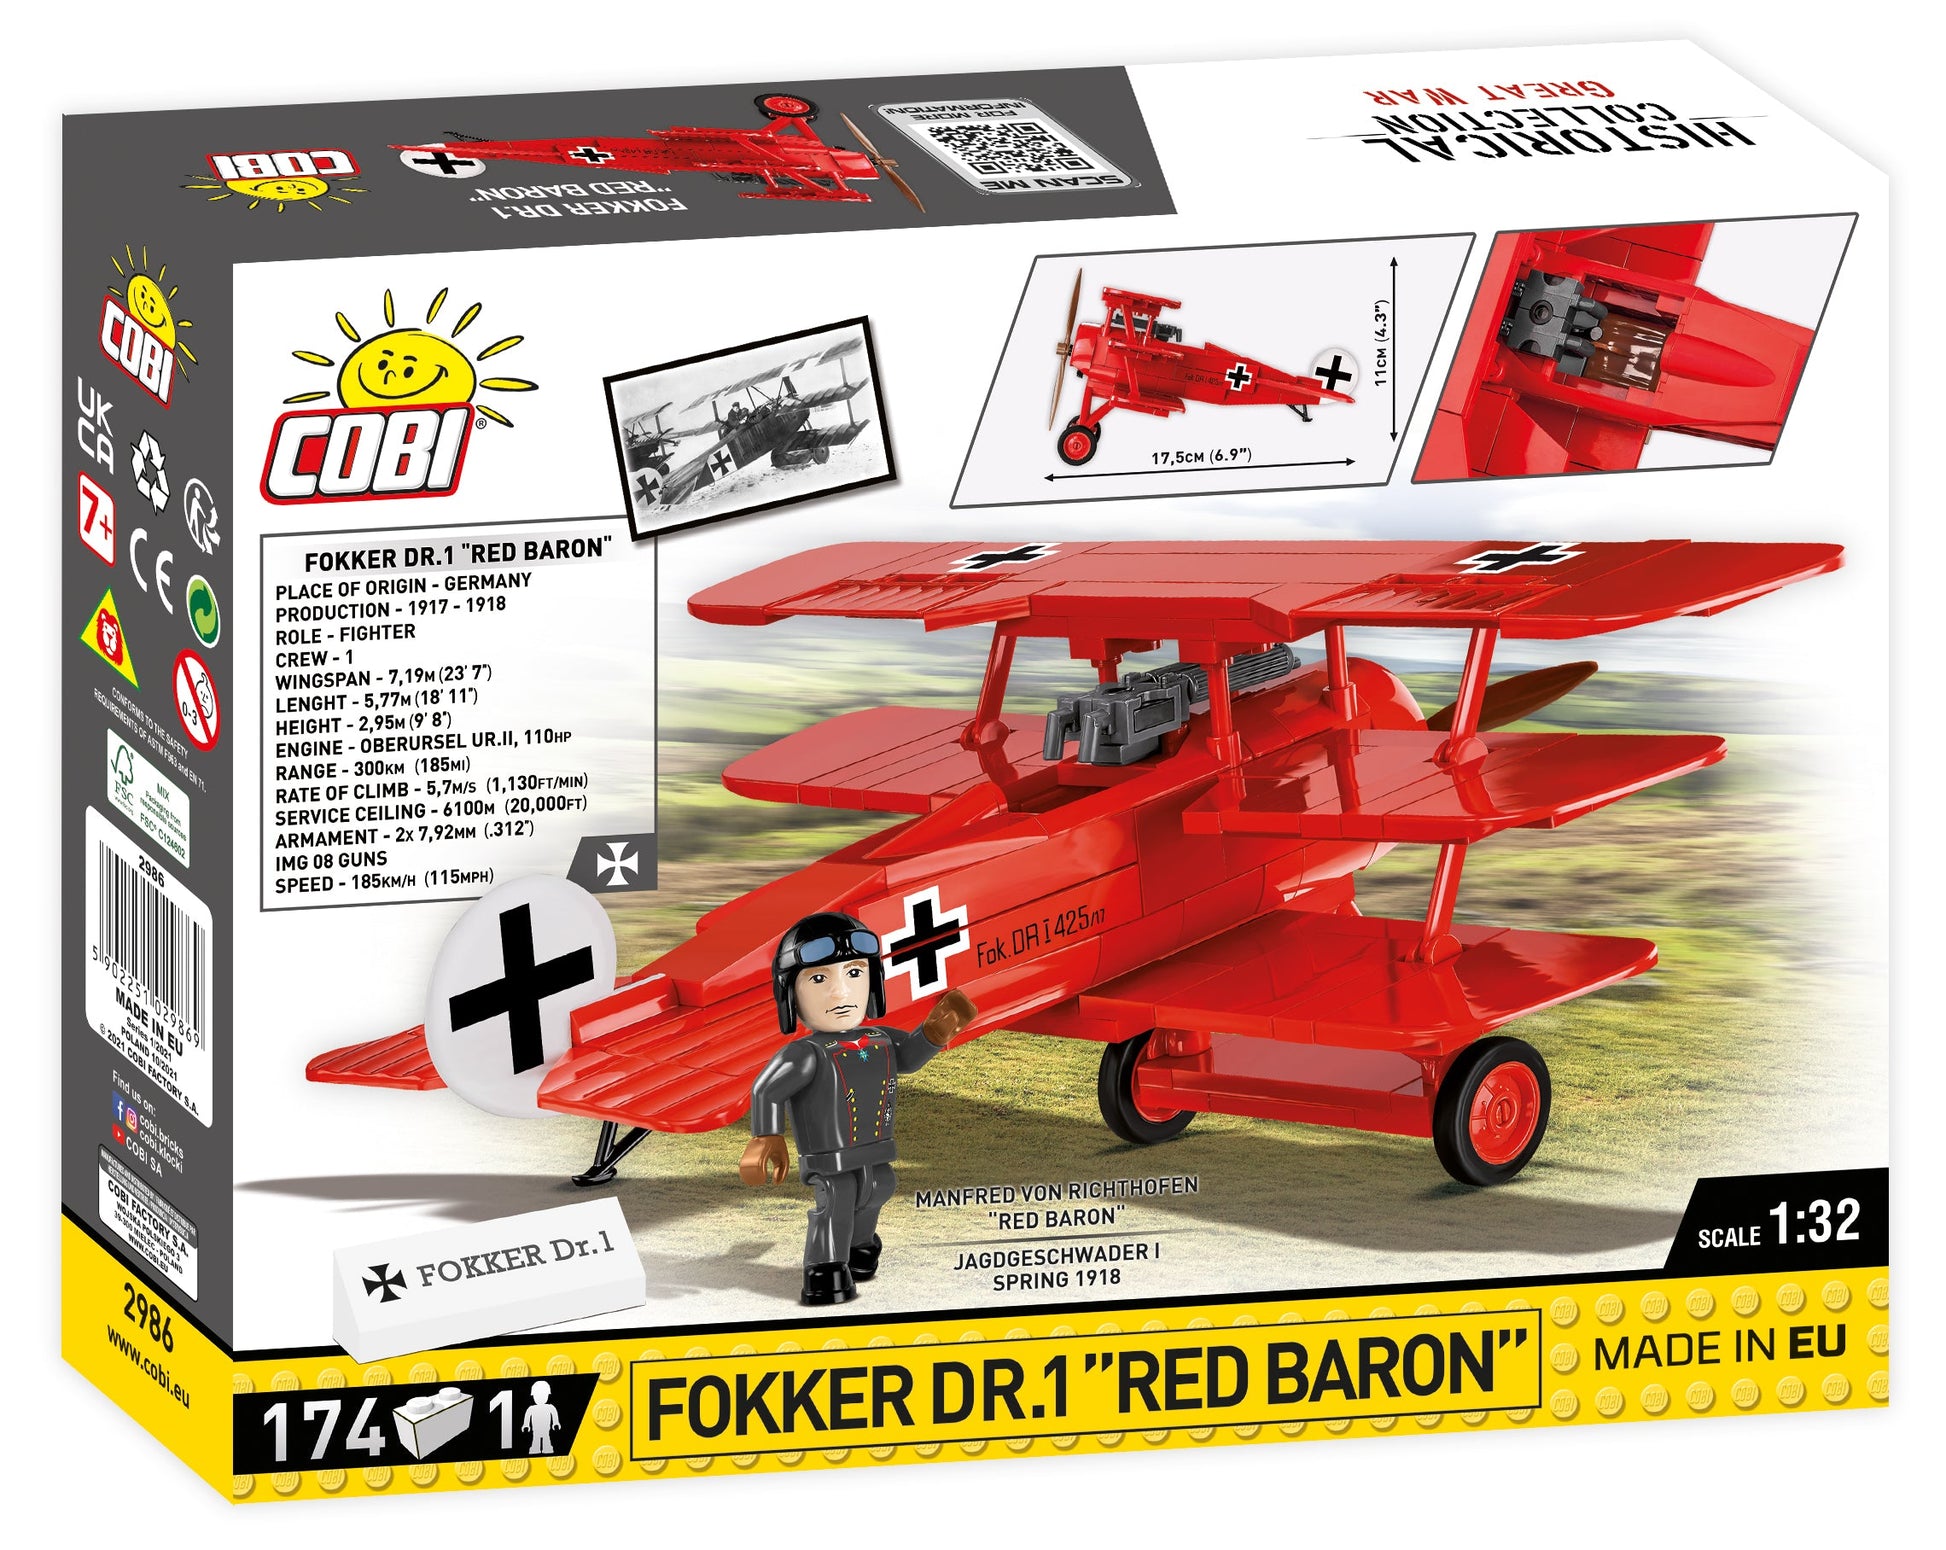 Meet the Fokker . . . and the Red Baron